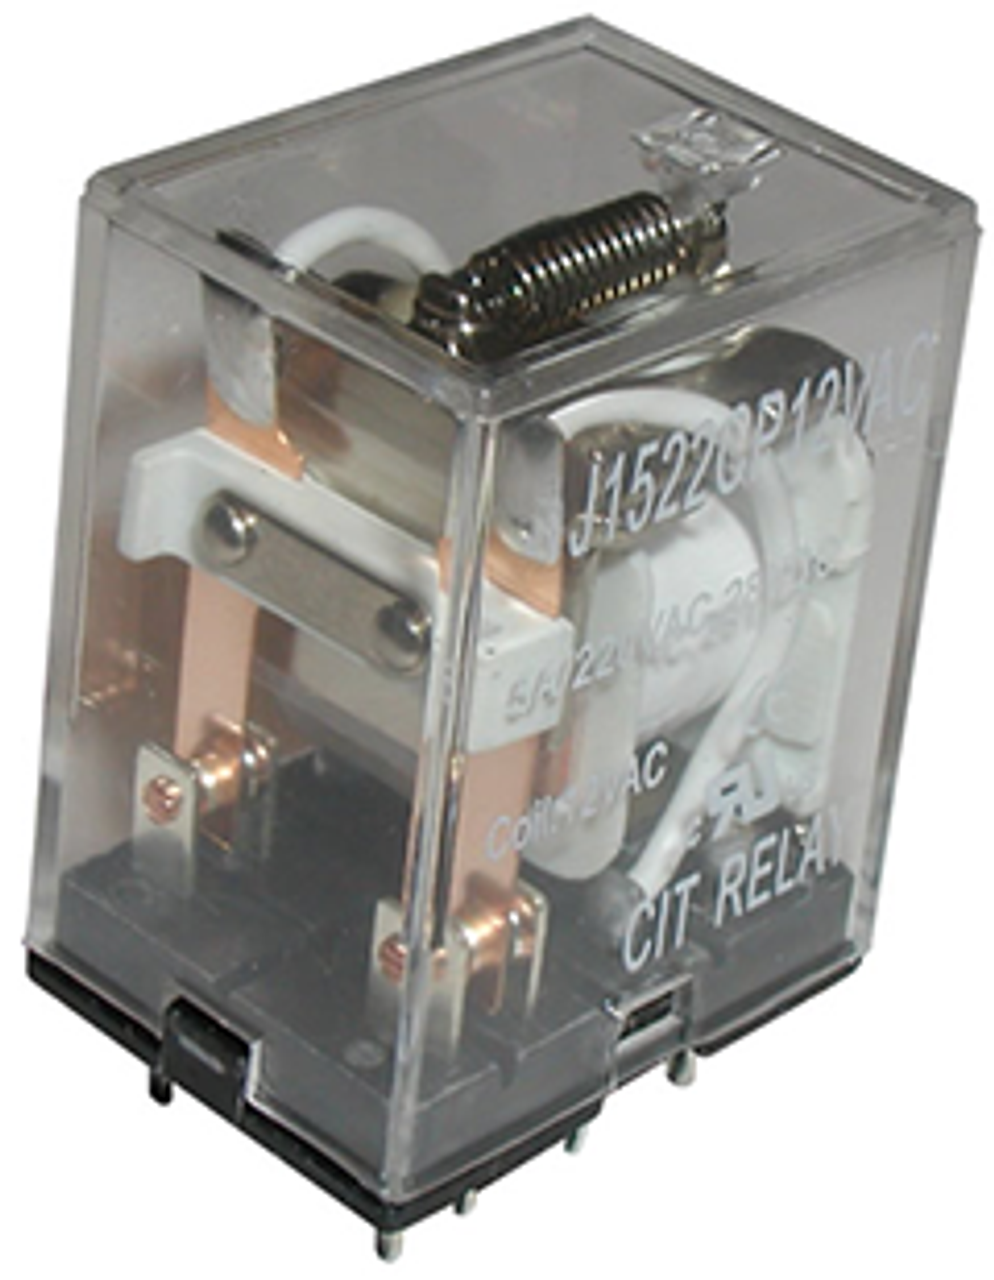 CIT Relay and Switch J1524CT220VAC Industrial Relays